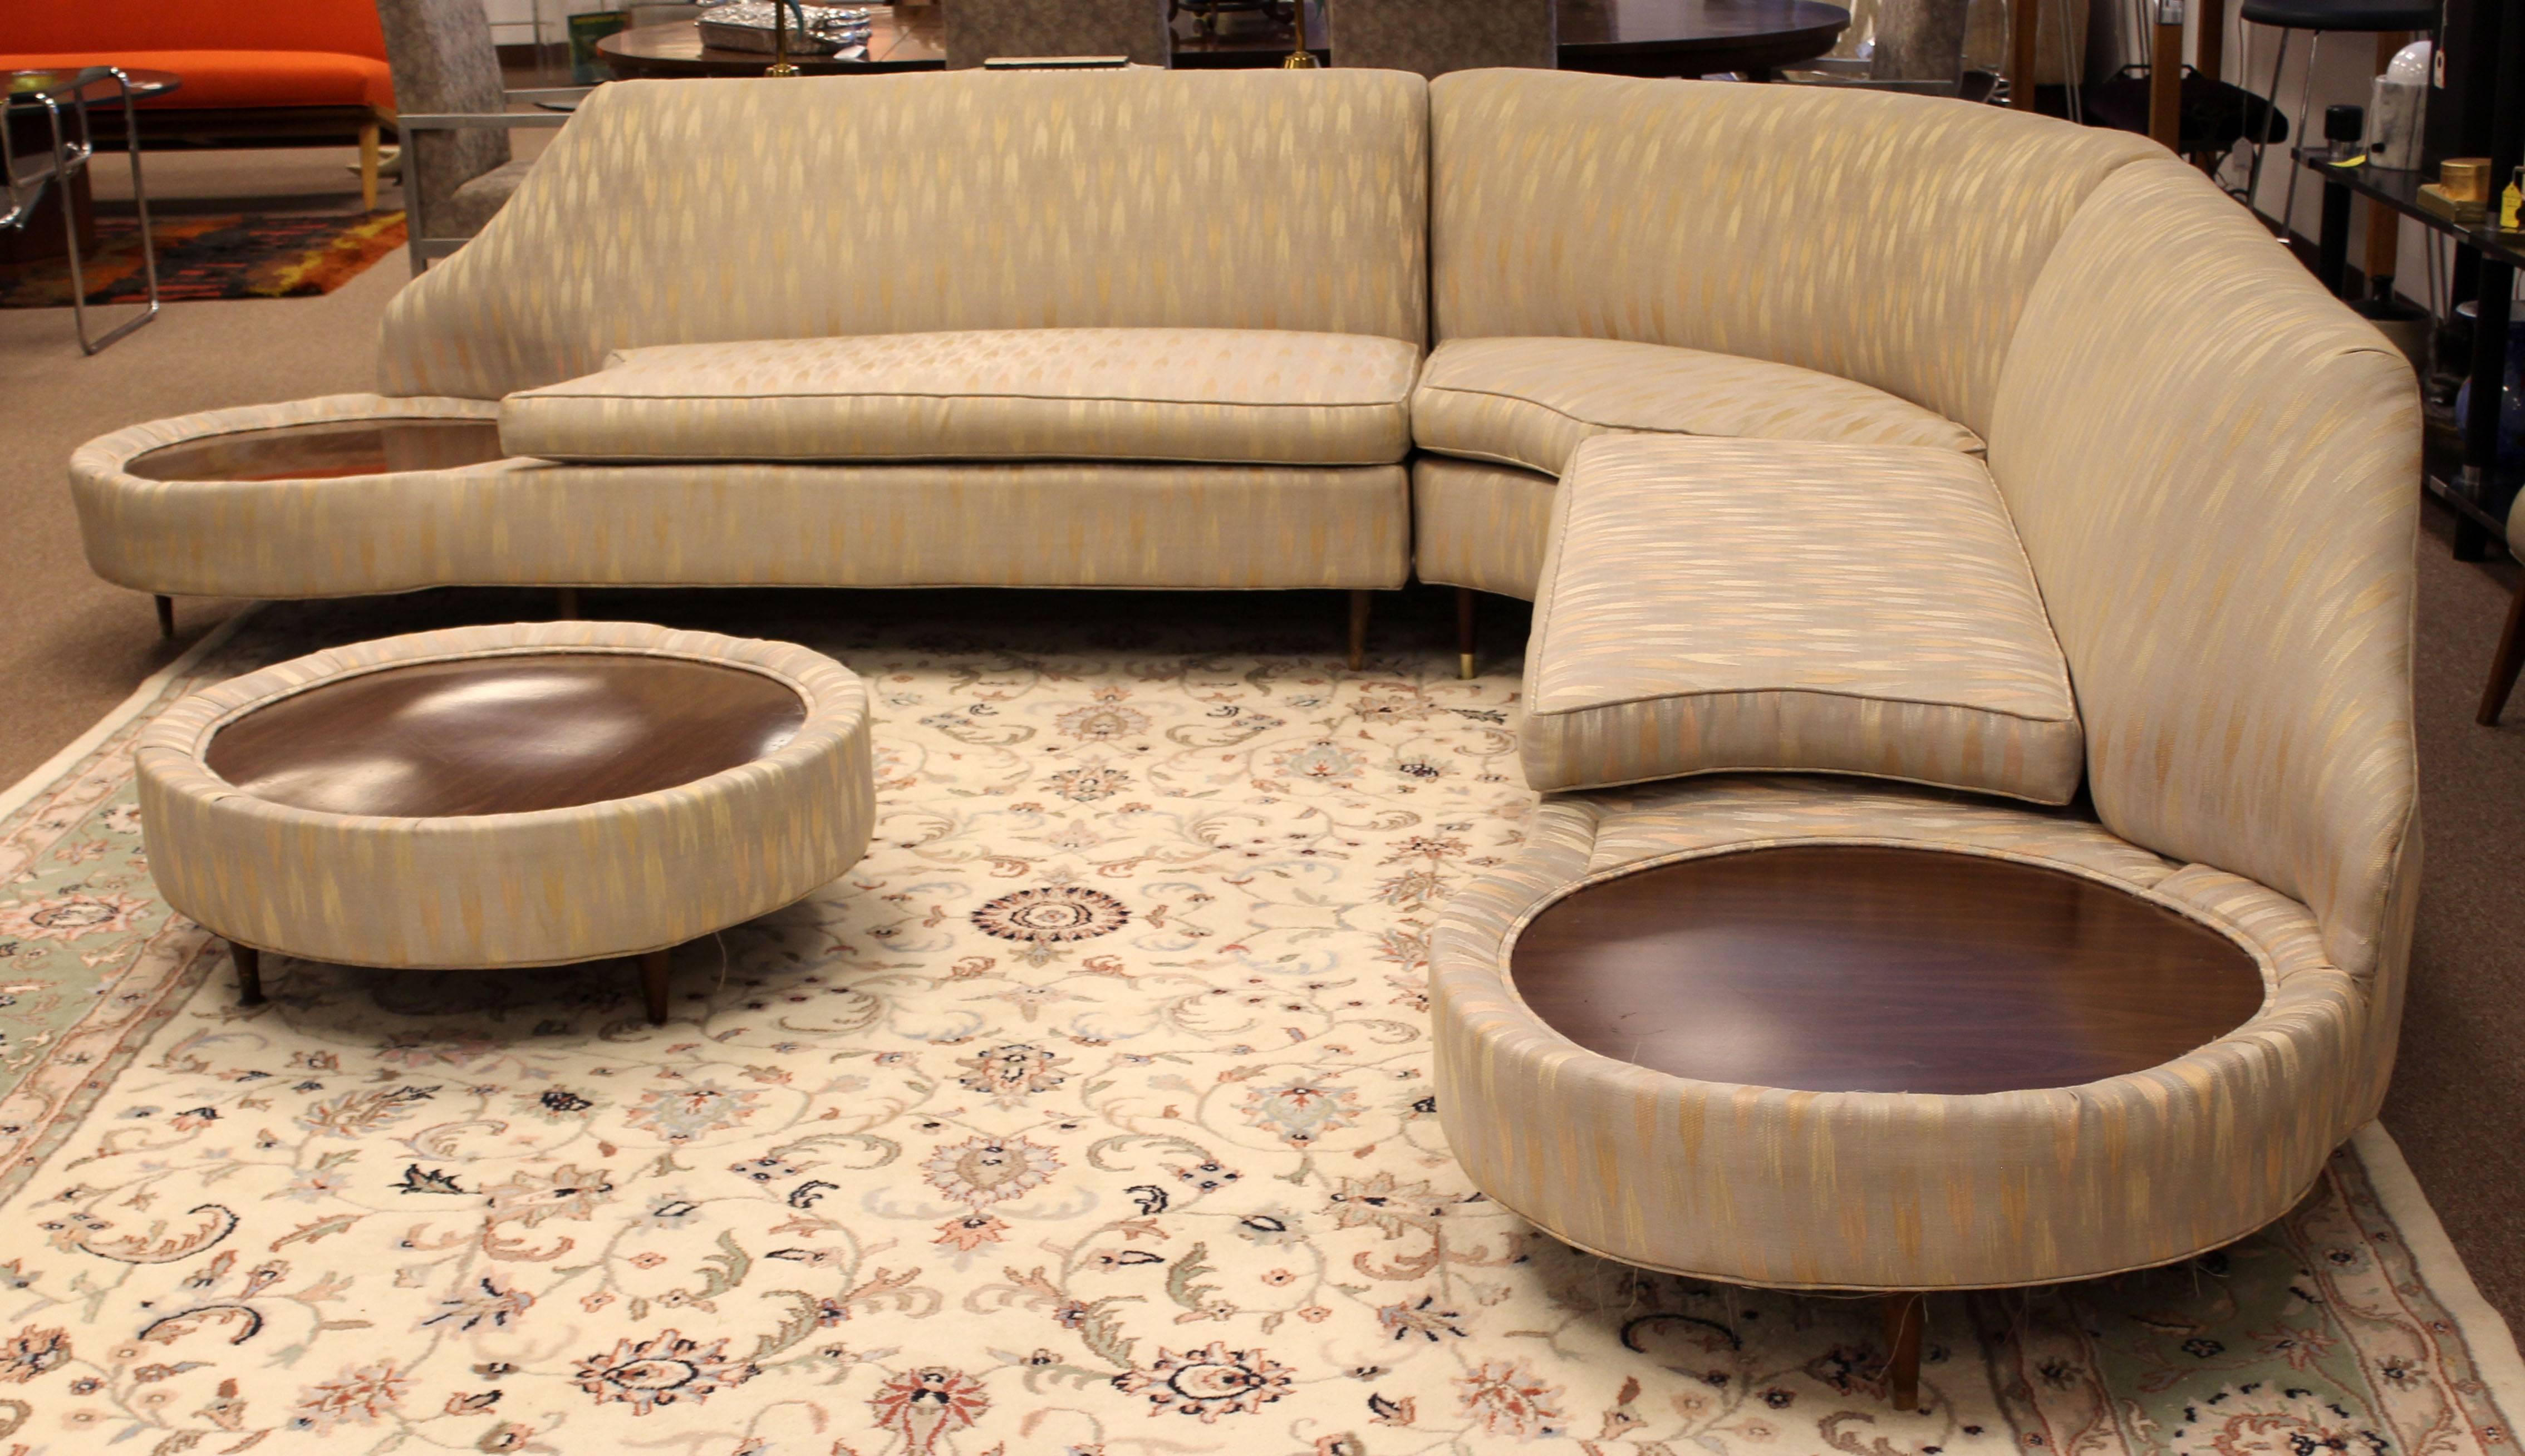 Mid-20th Century Mid-Century Modern Three-Piece Curved Sofa Sectional Ottoman Side Tables